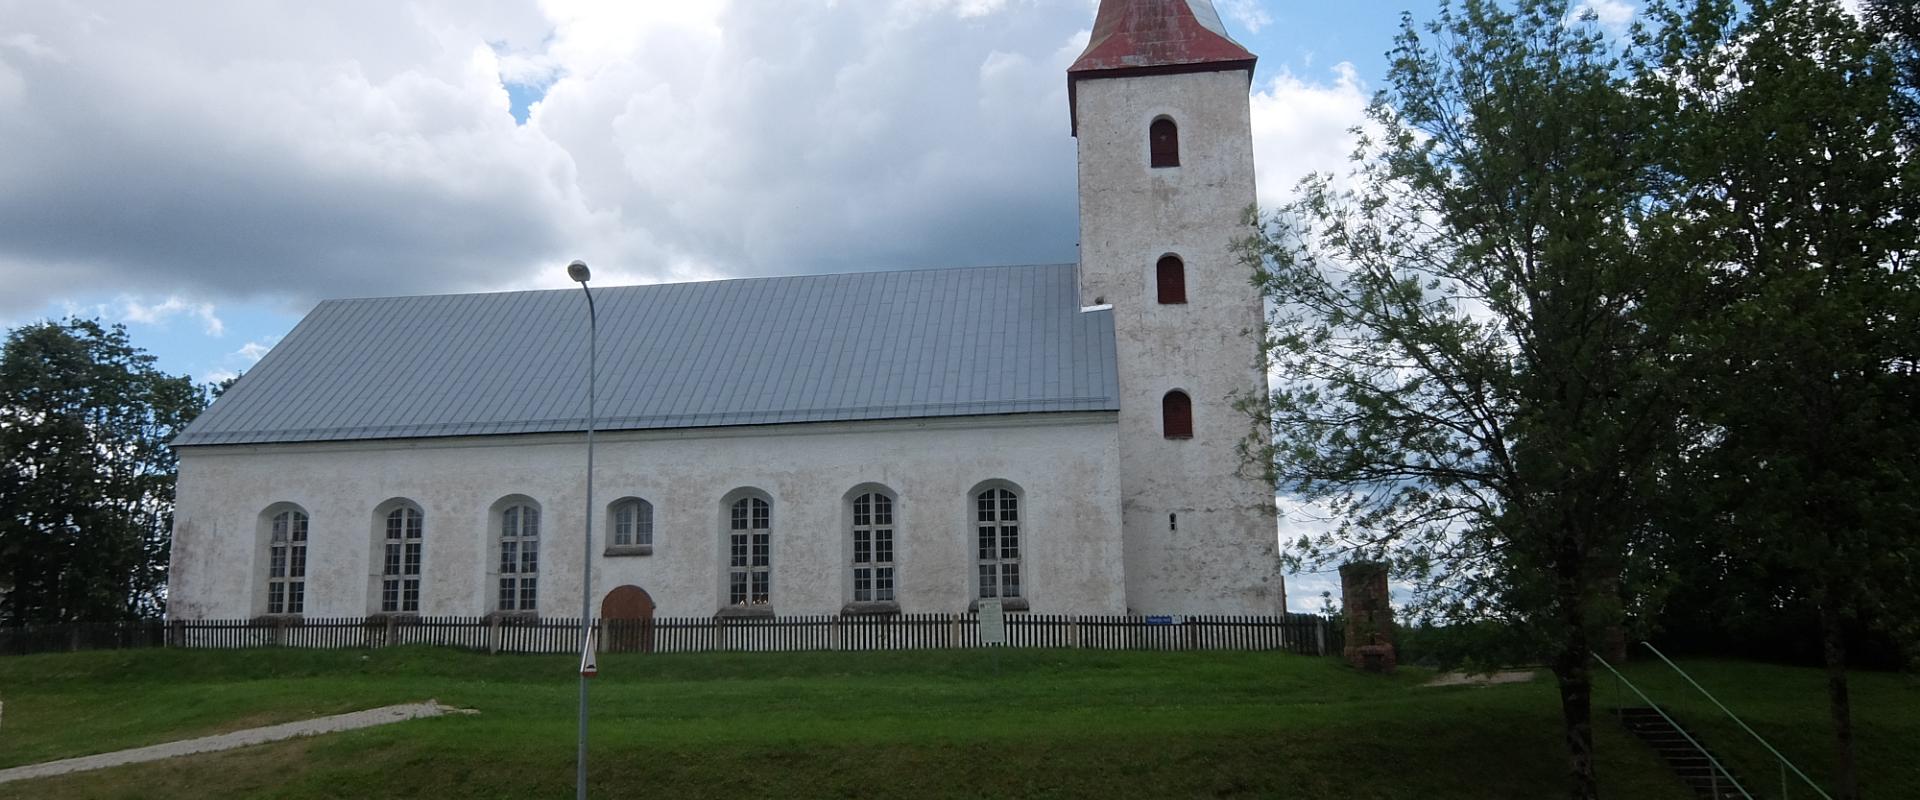 St. Mary's Church in Rõuge